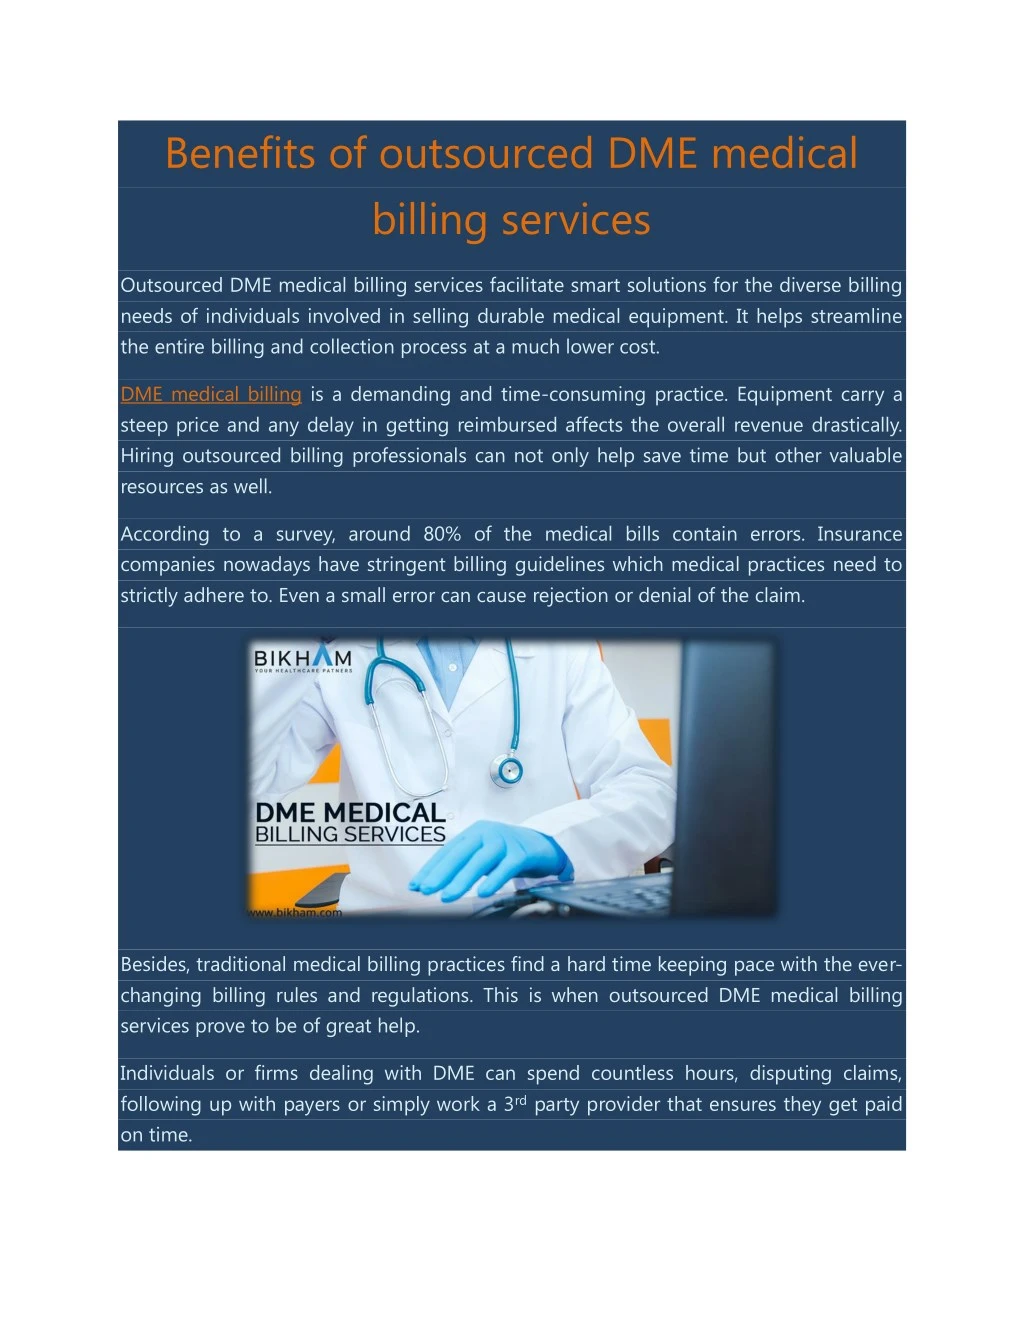 benefits of outsourced dme medical billing